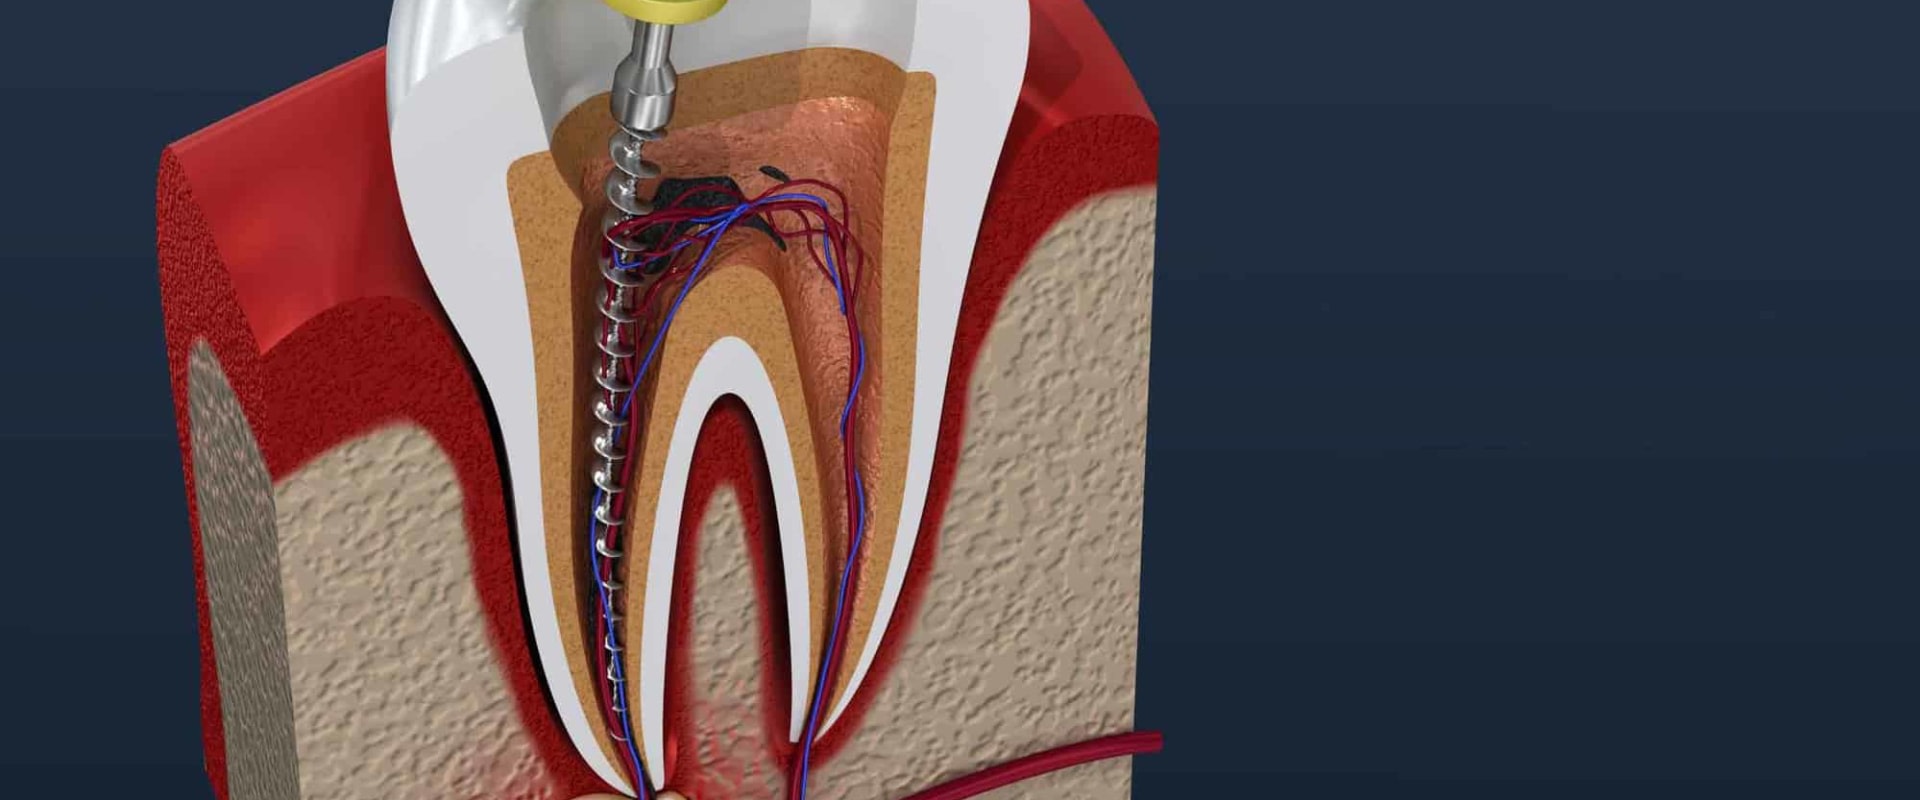 What is the Smallest Endodontic File?